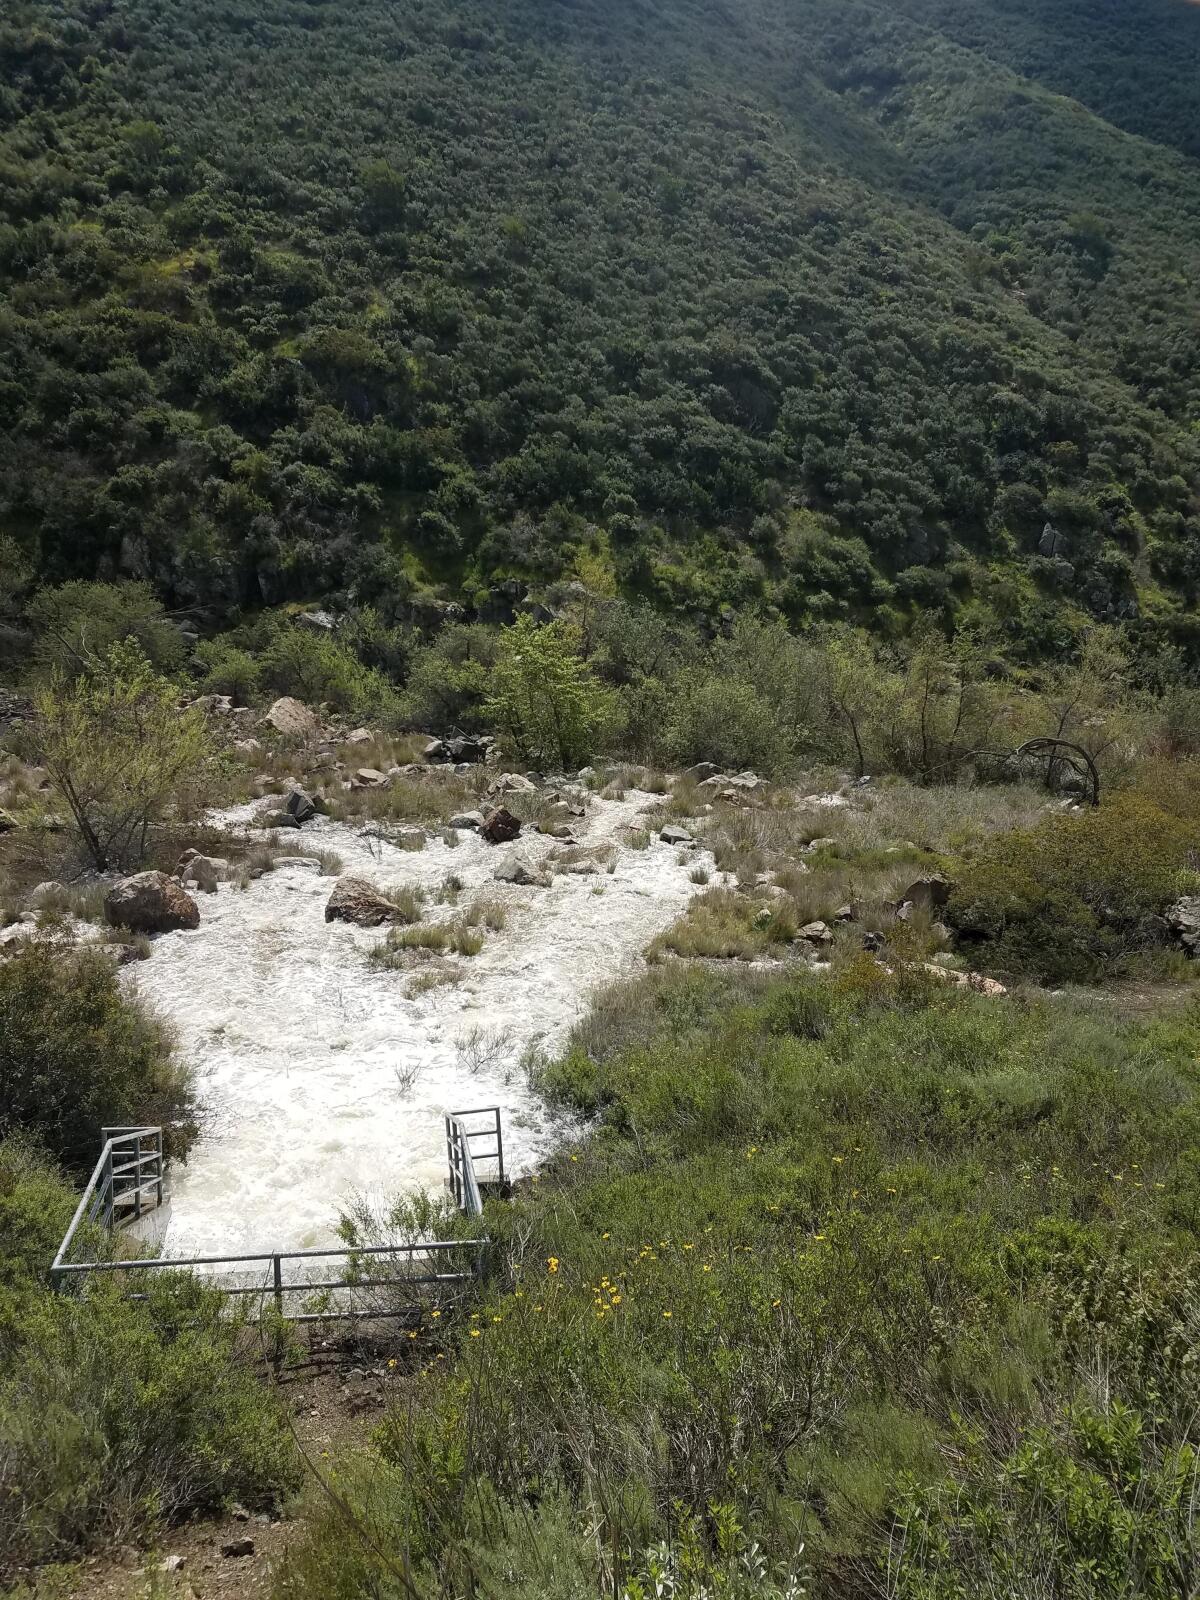 Water released from the Hodges Reservoir into the San Dieguito River bed.